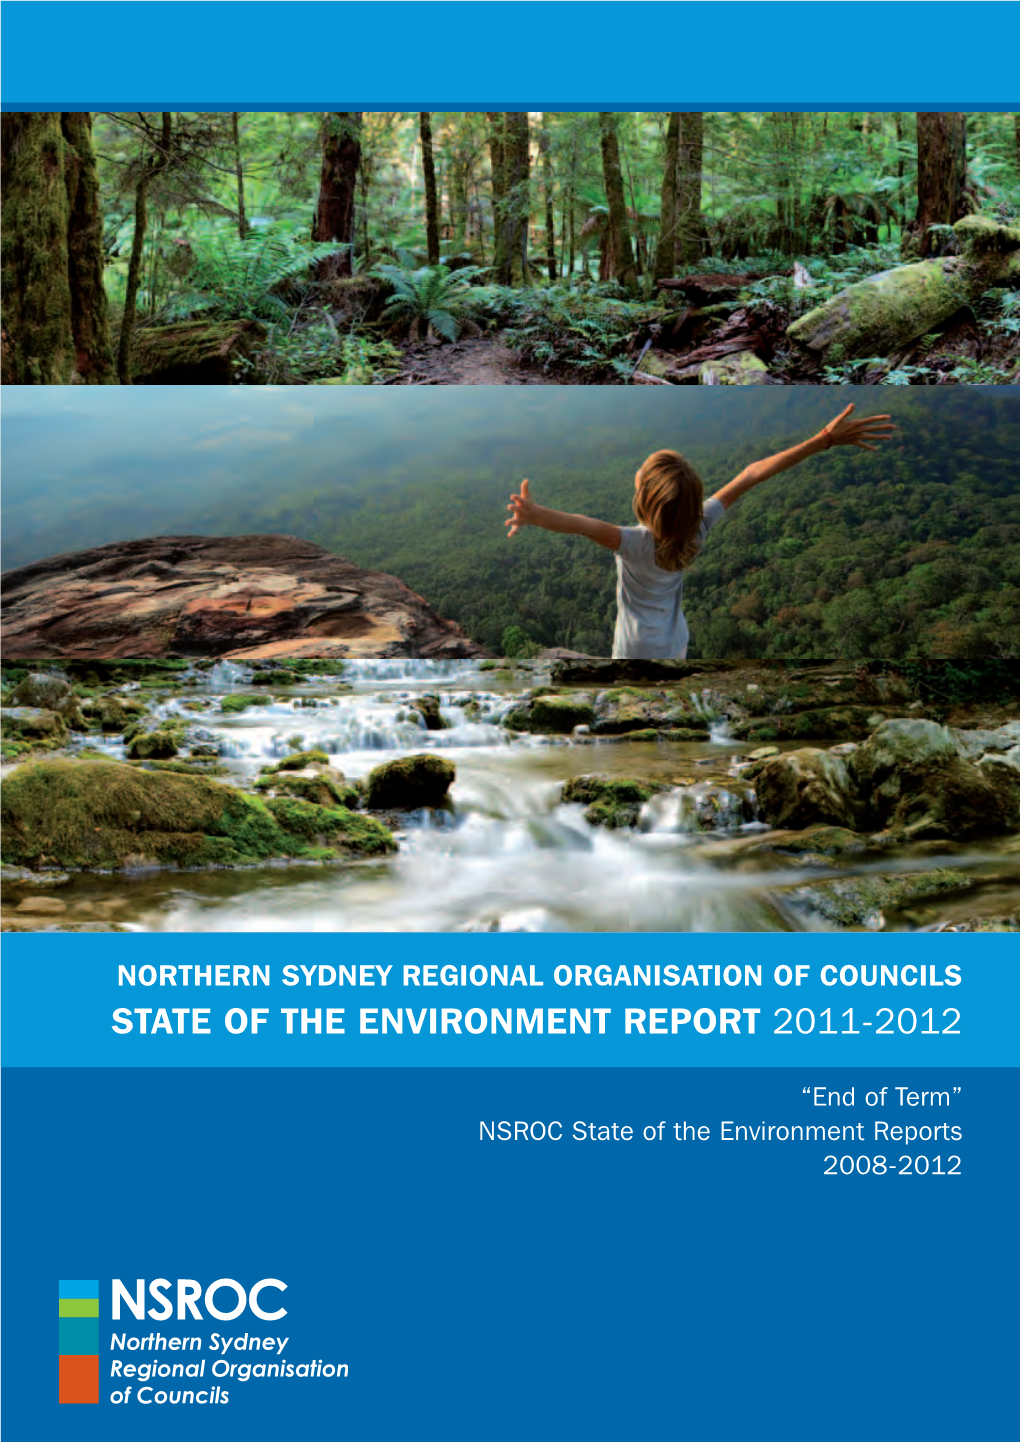 State of the Environment Report 2011-2012